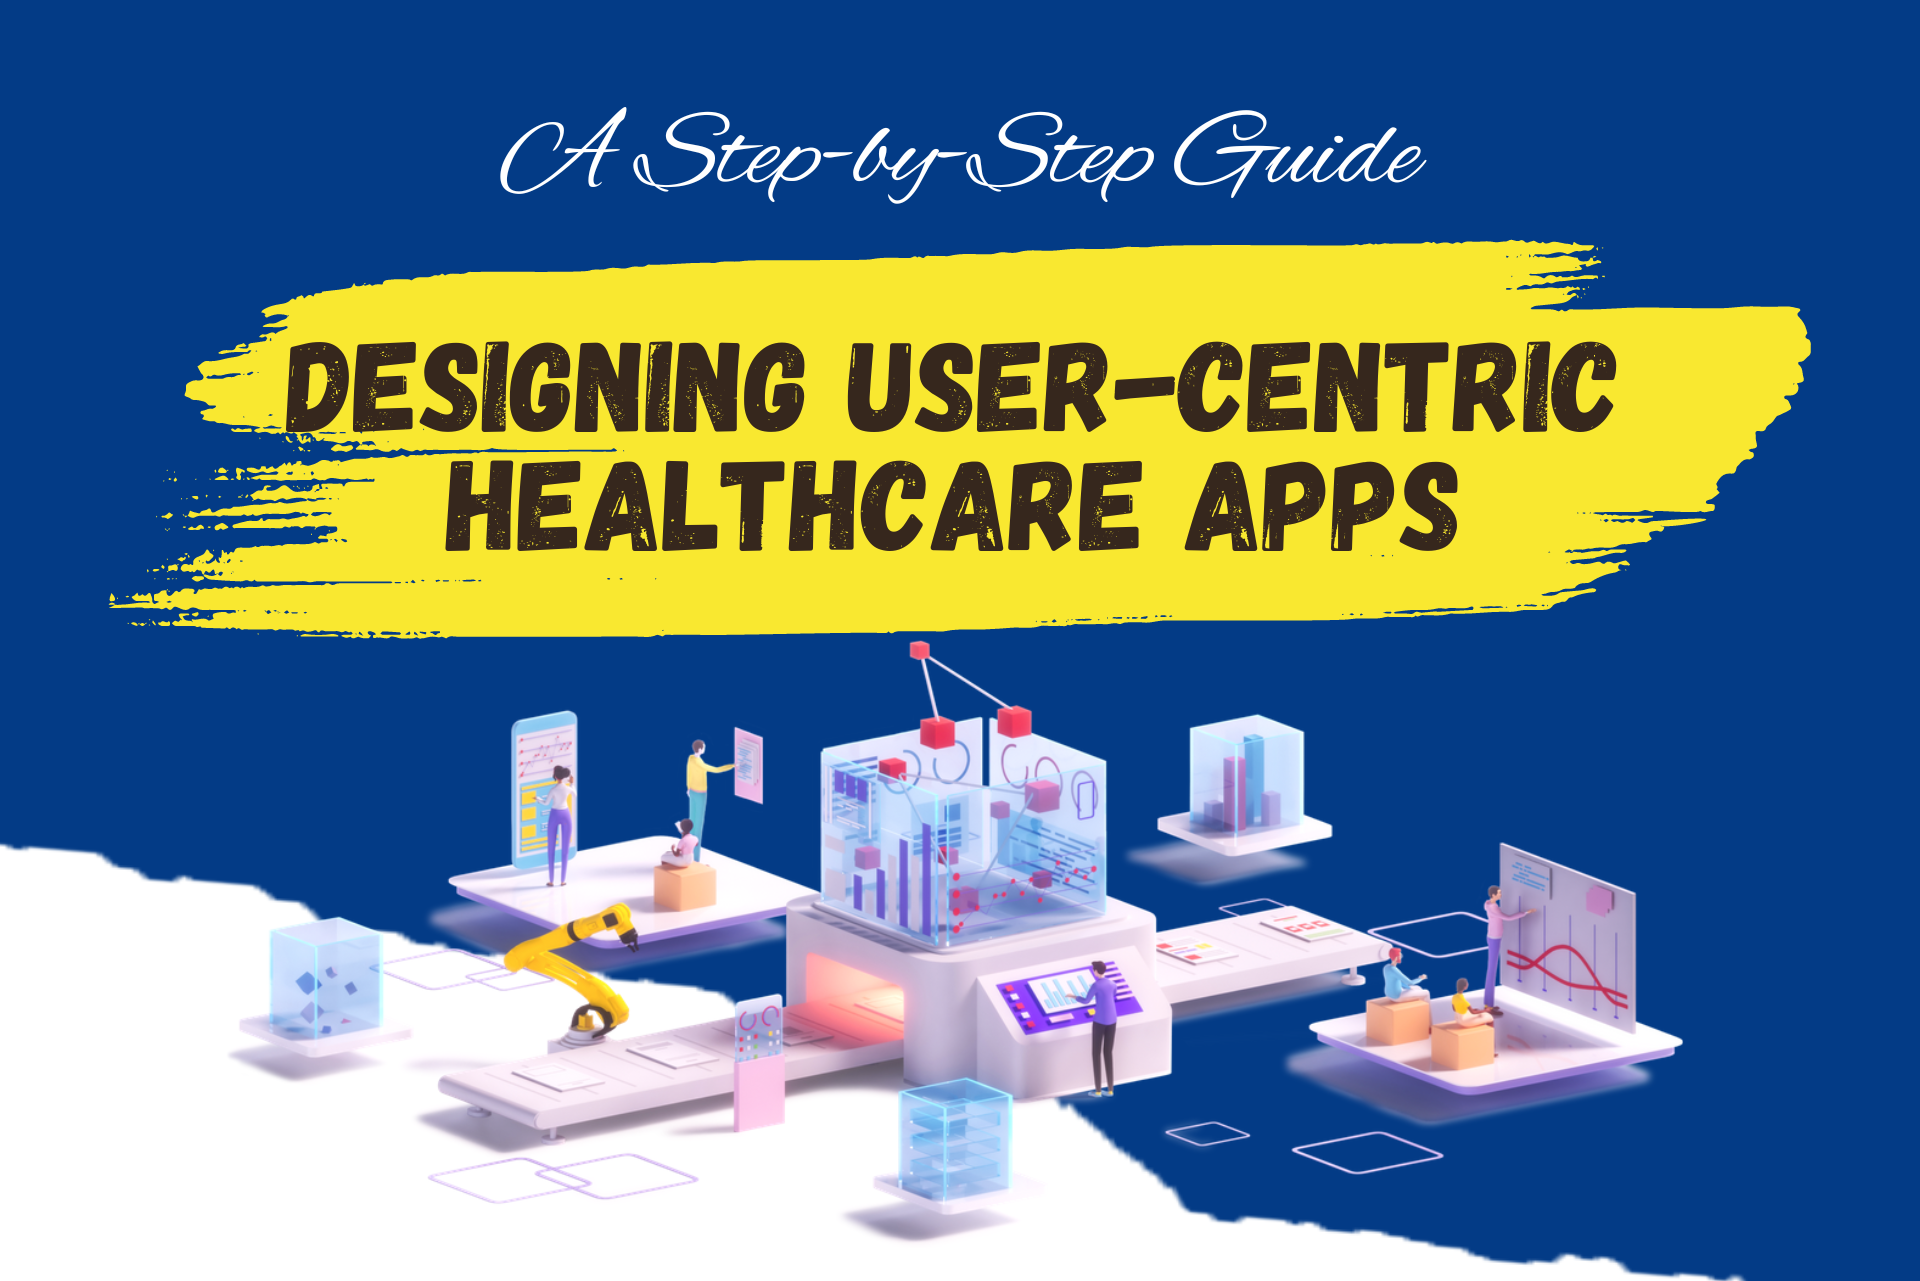 Designing User-Centric Healthcare Apps